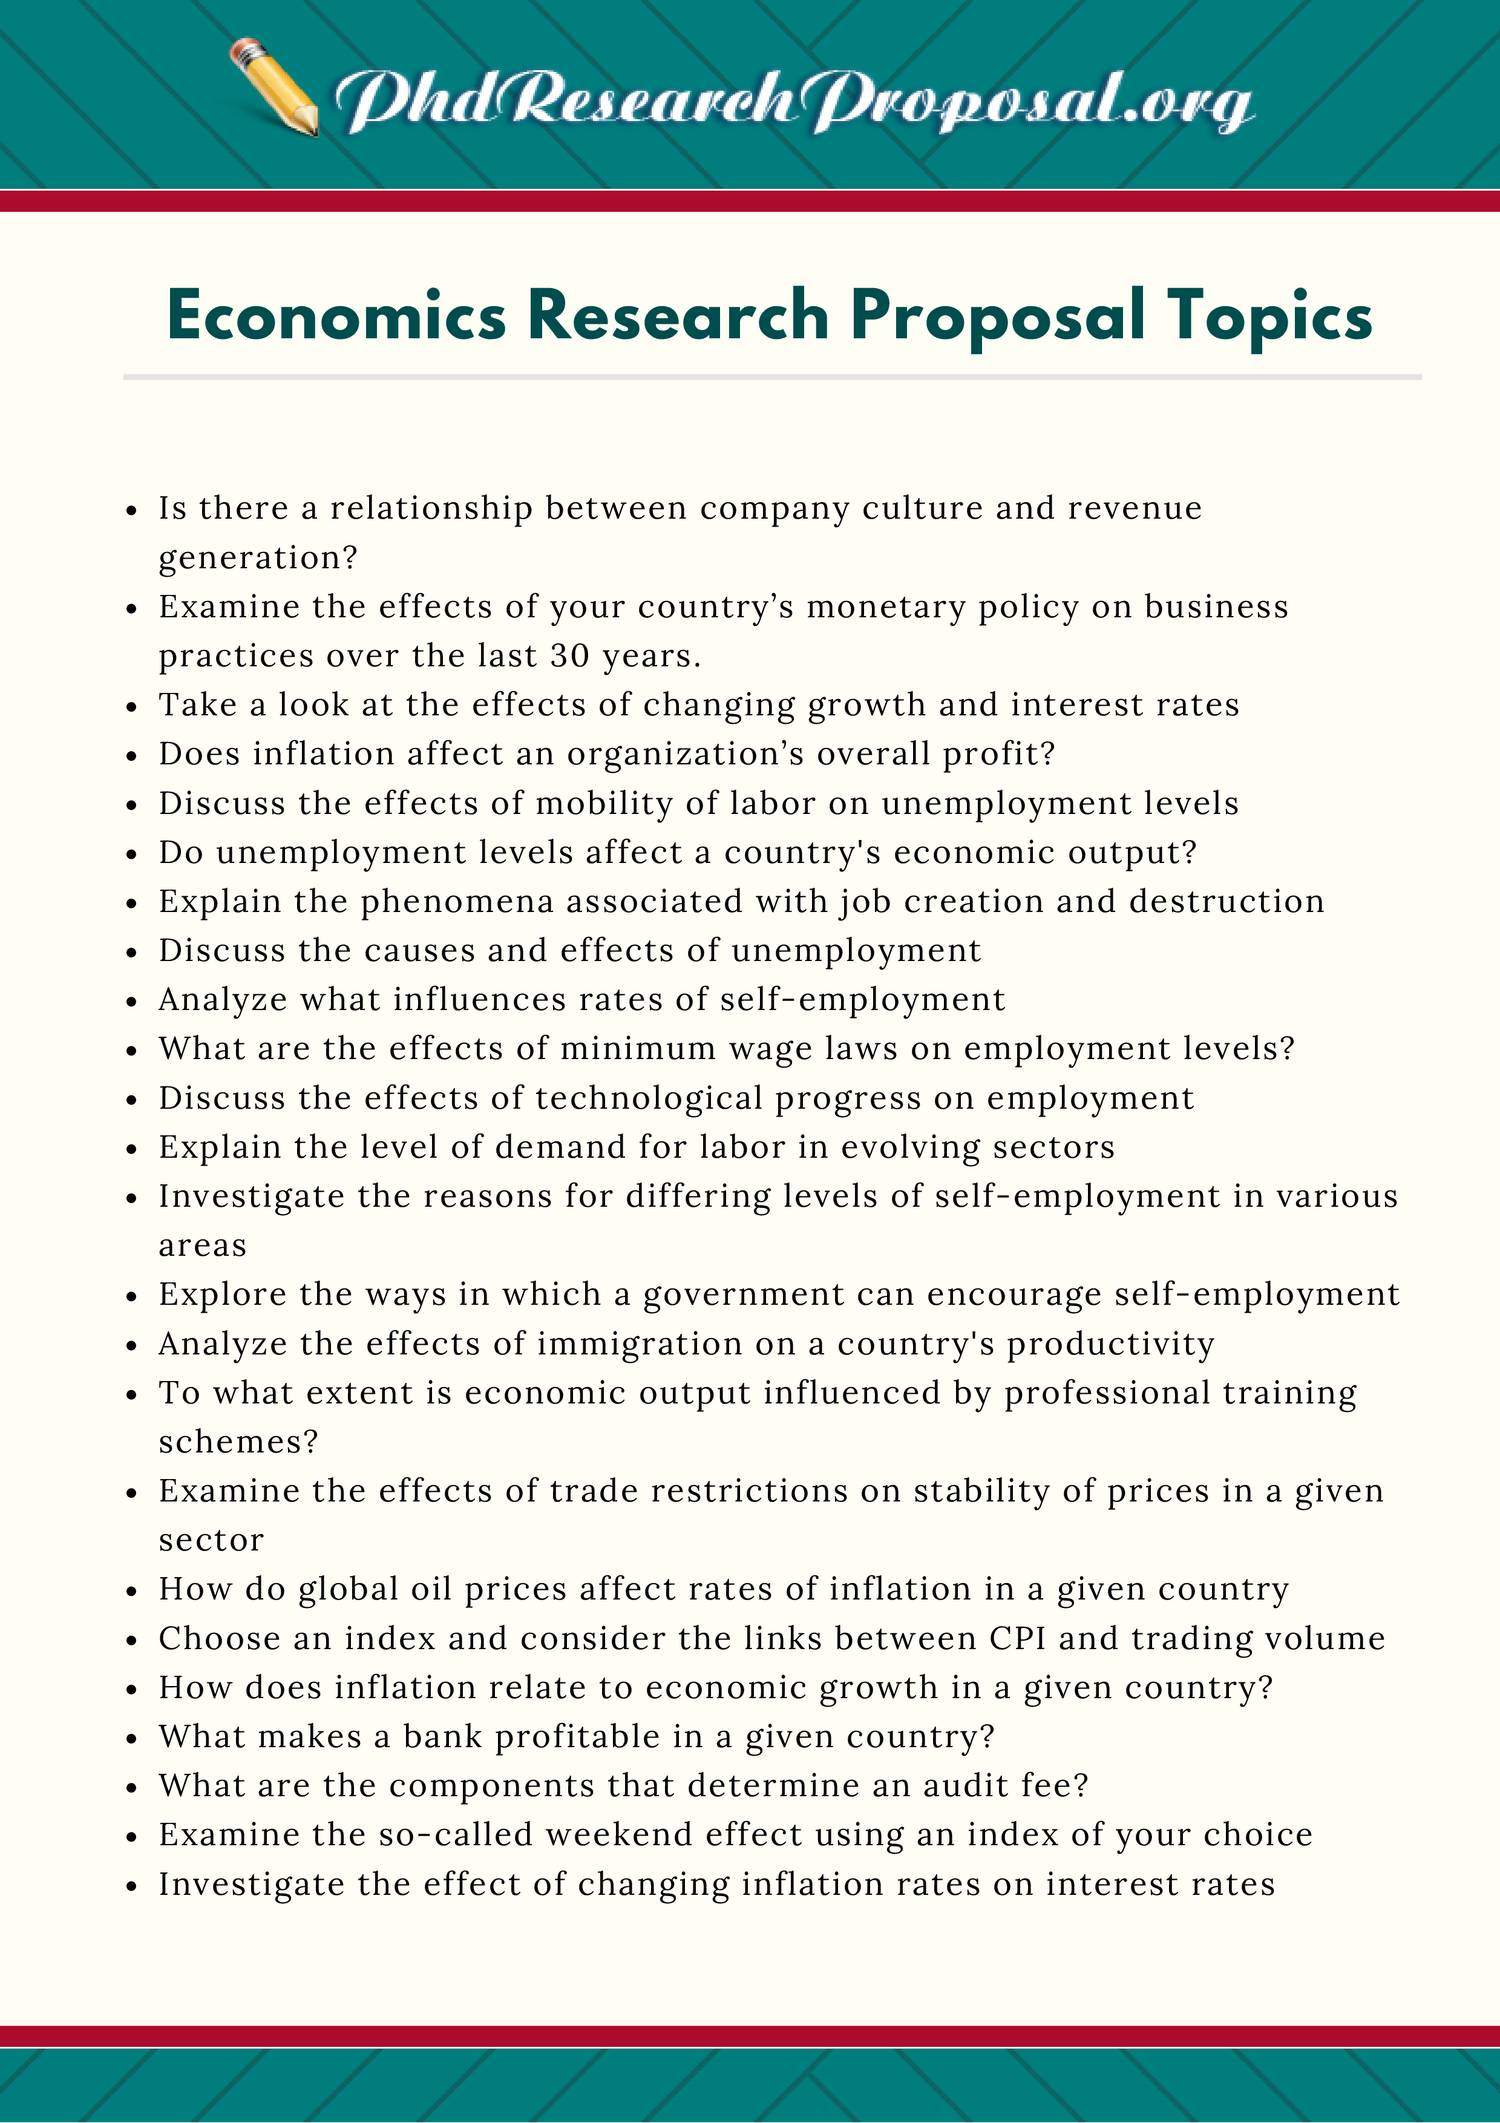 research projects for economics